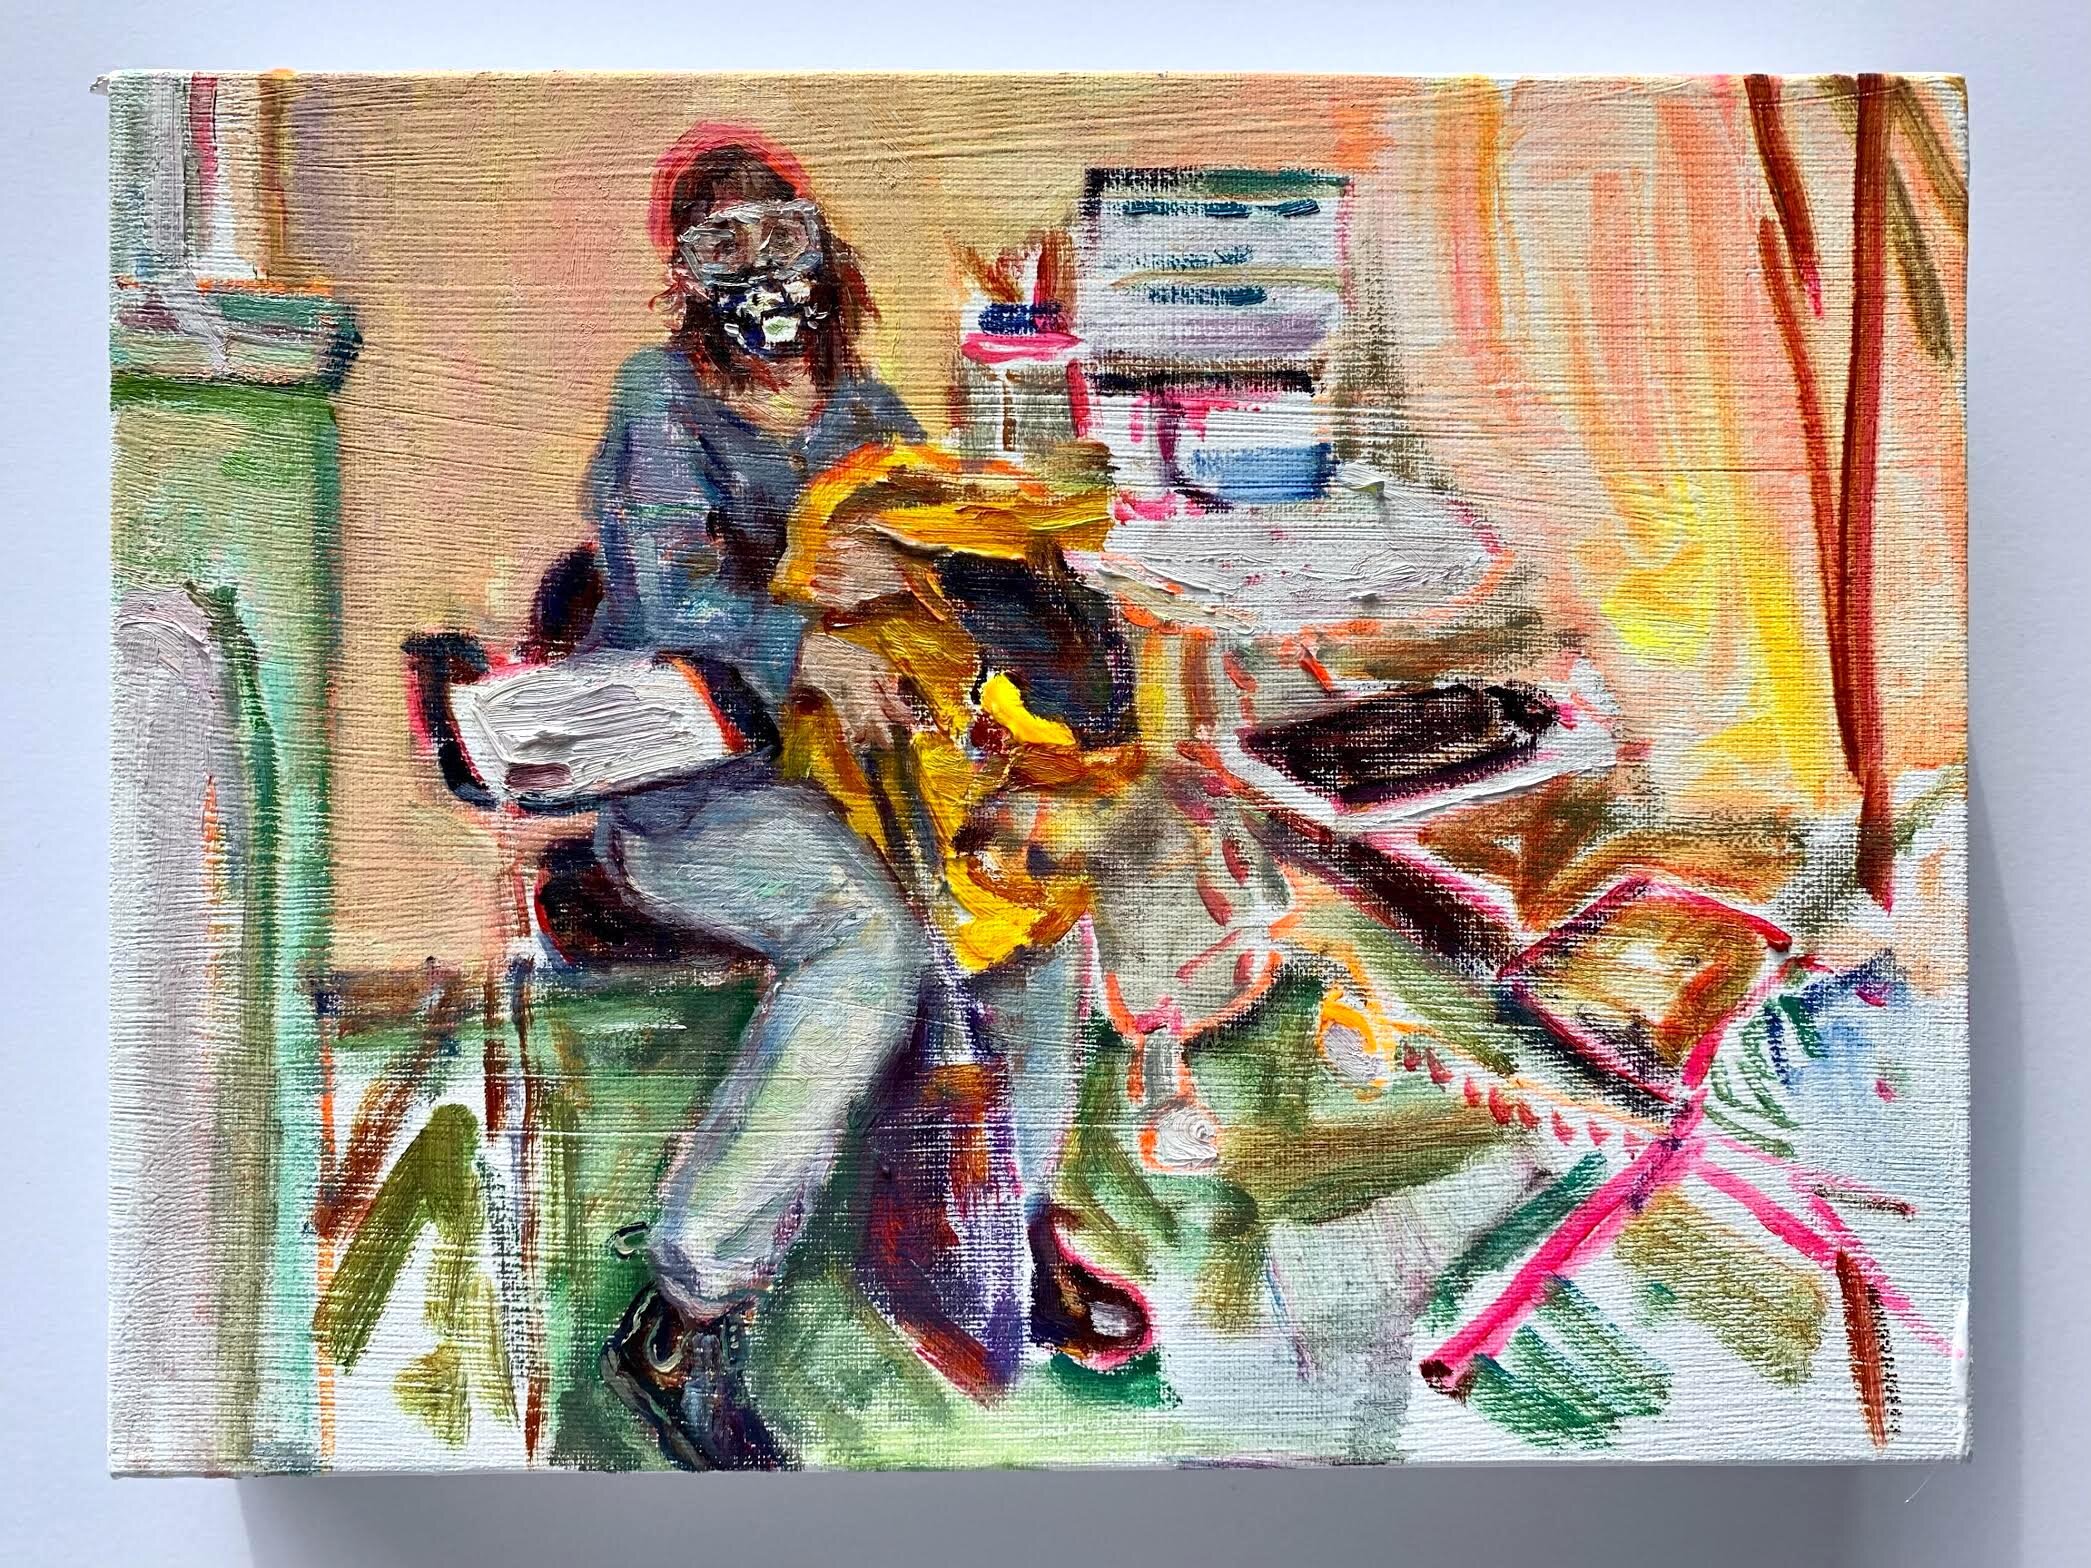  Waiting for the Vaccine, 2021  oil on canvas  9 x 12 inches 